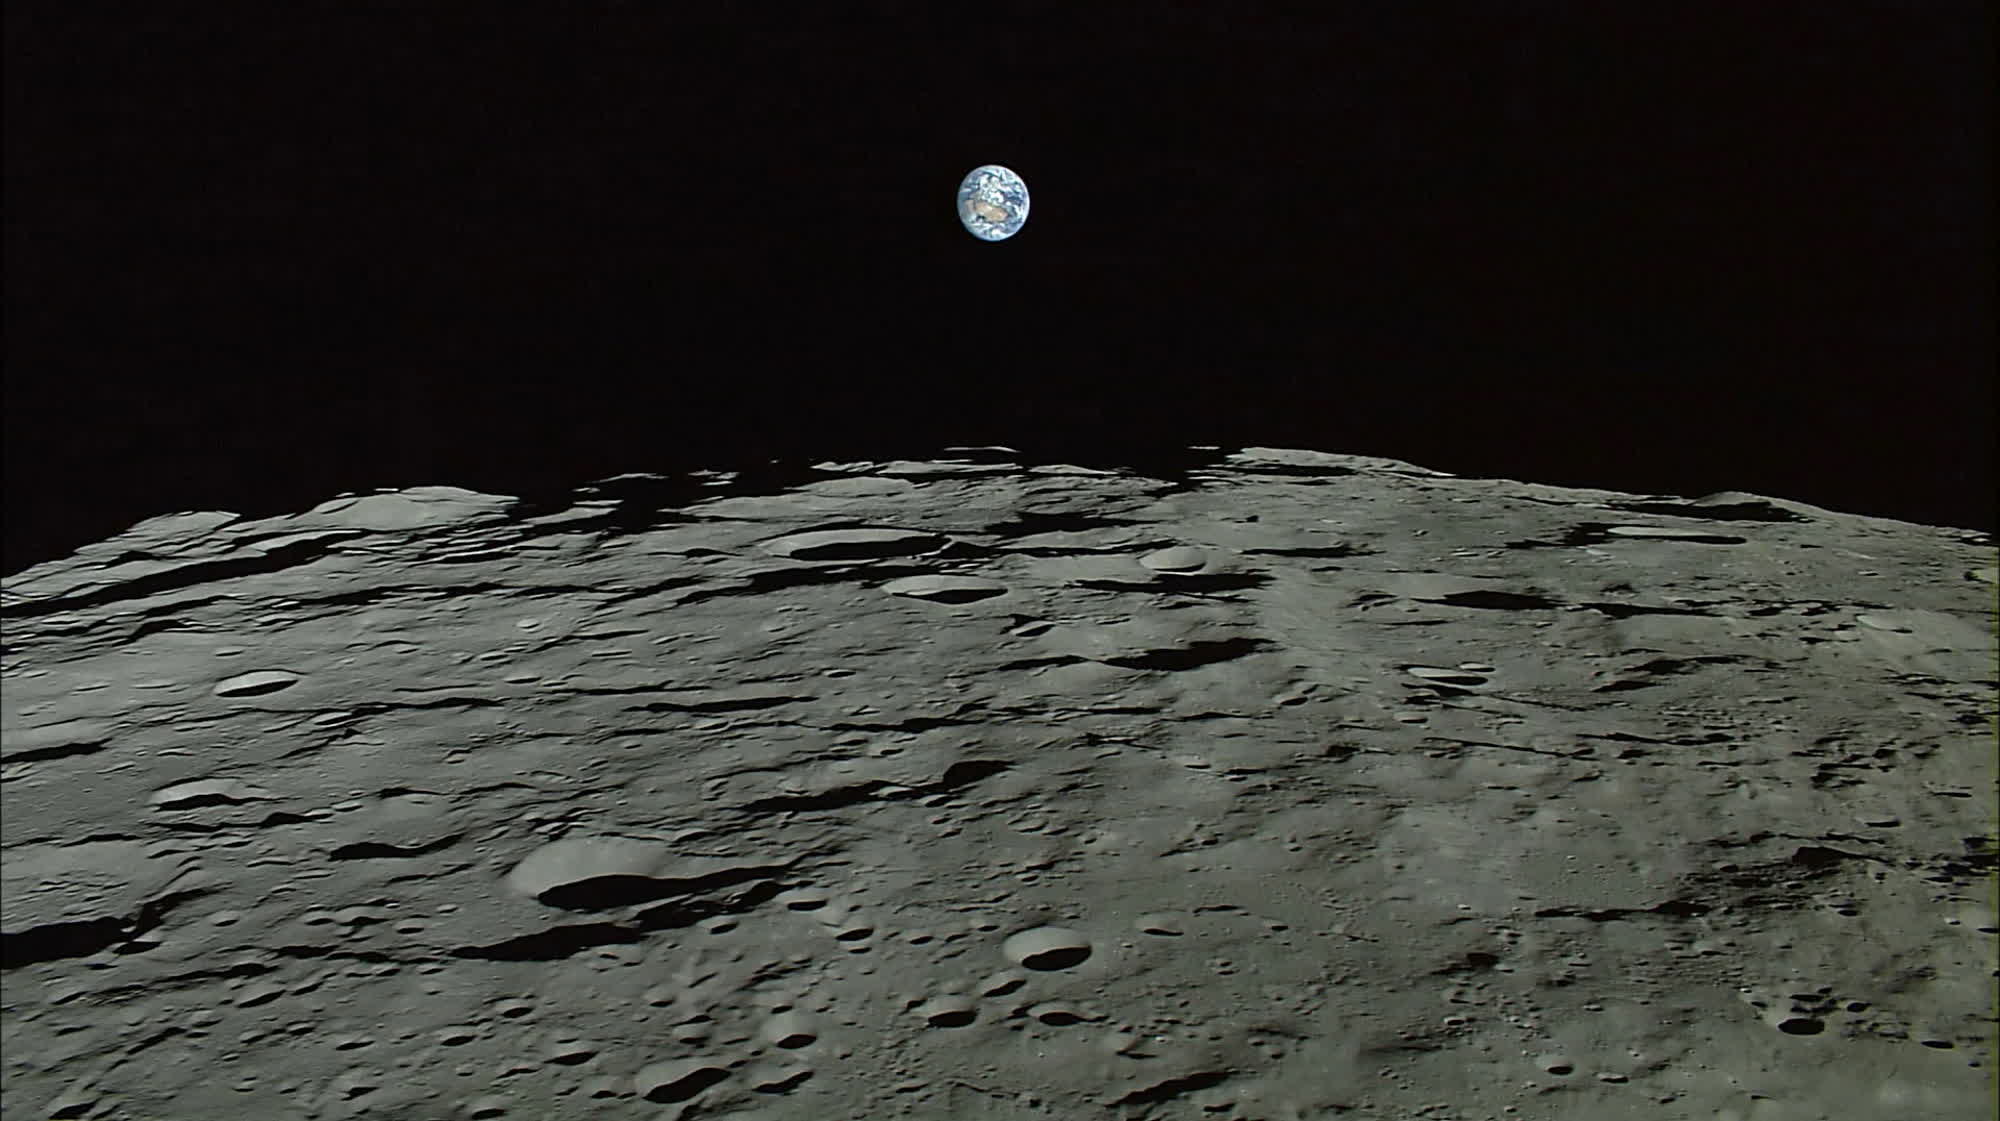 Space startup Lonestar is sending a miniature data center to the Moon